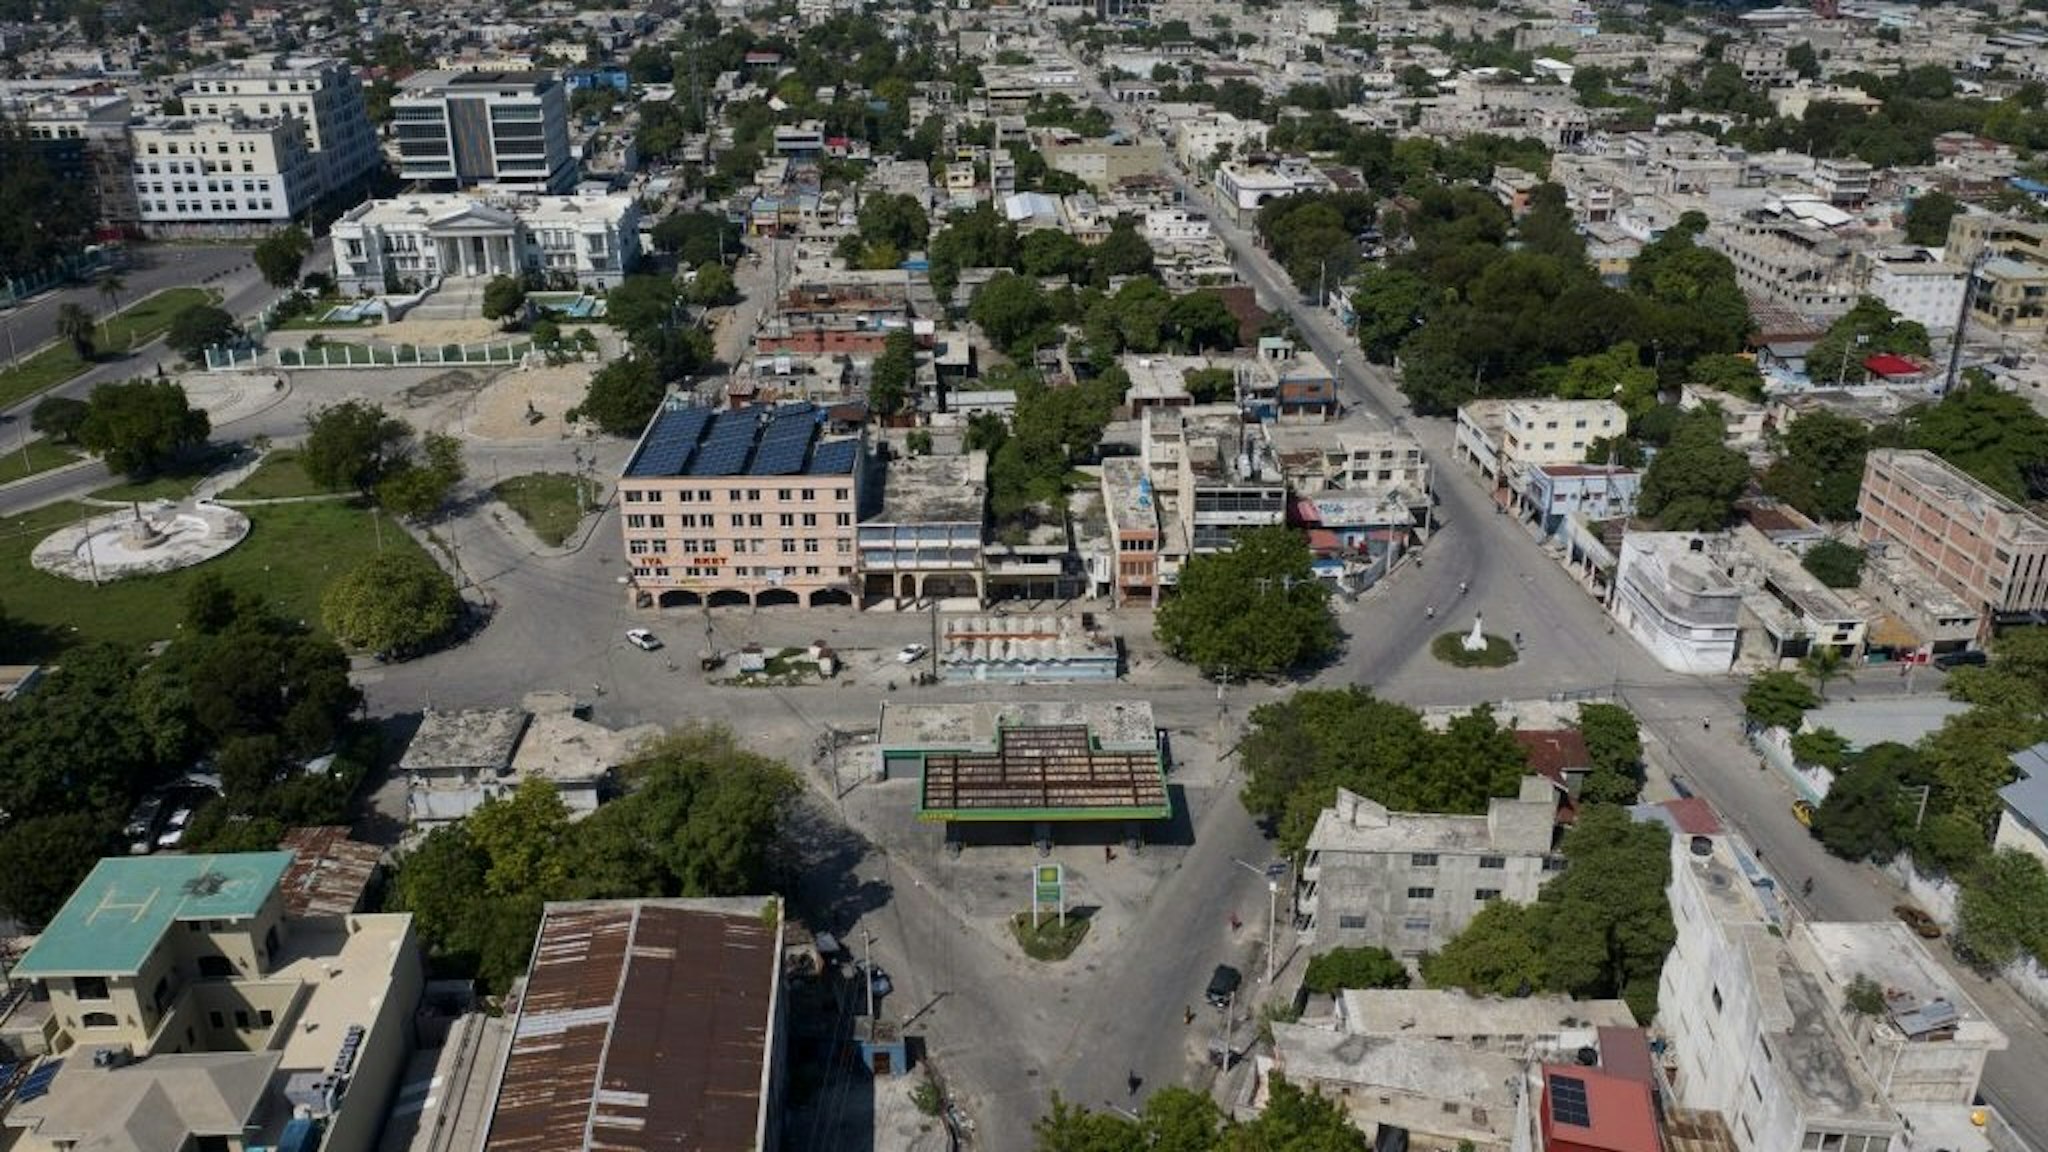 HAITI-ECONOMY-FUEL-SHORTAGE Aerial view shows empty streets due to a general strike and lack of transportation, amid a fuel shortage in Port-au-Prince, Haiti, on October 26, 2021. (Photo by Ricardo ARDUENGO / AFP) (Photo by RICARDO ARDUENGO/AFP via Getty Images) RICARDO ARDUENGO / Contributor